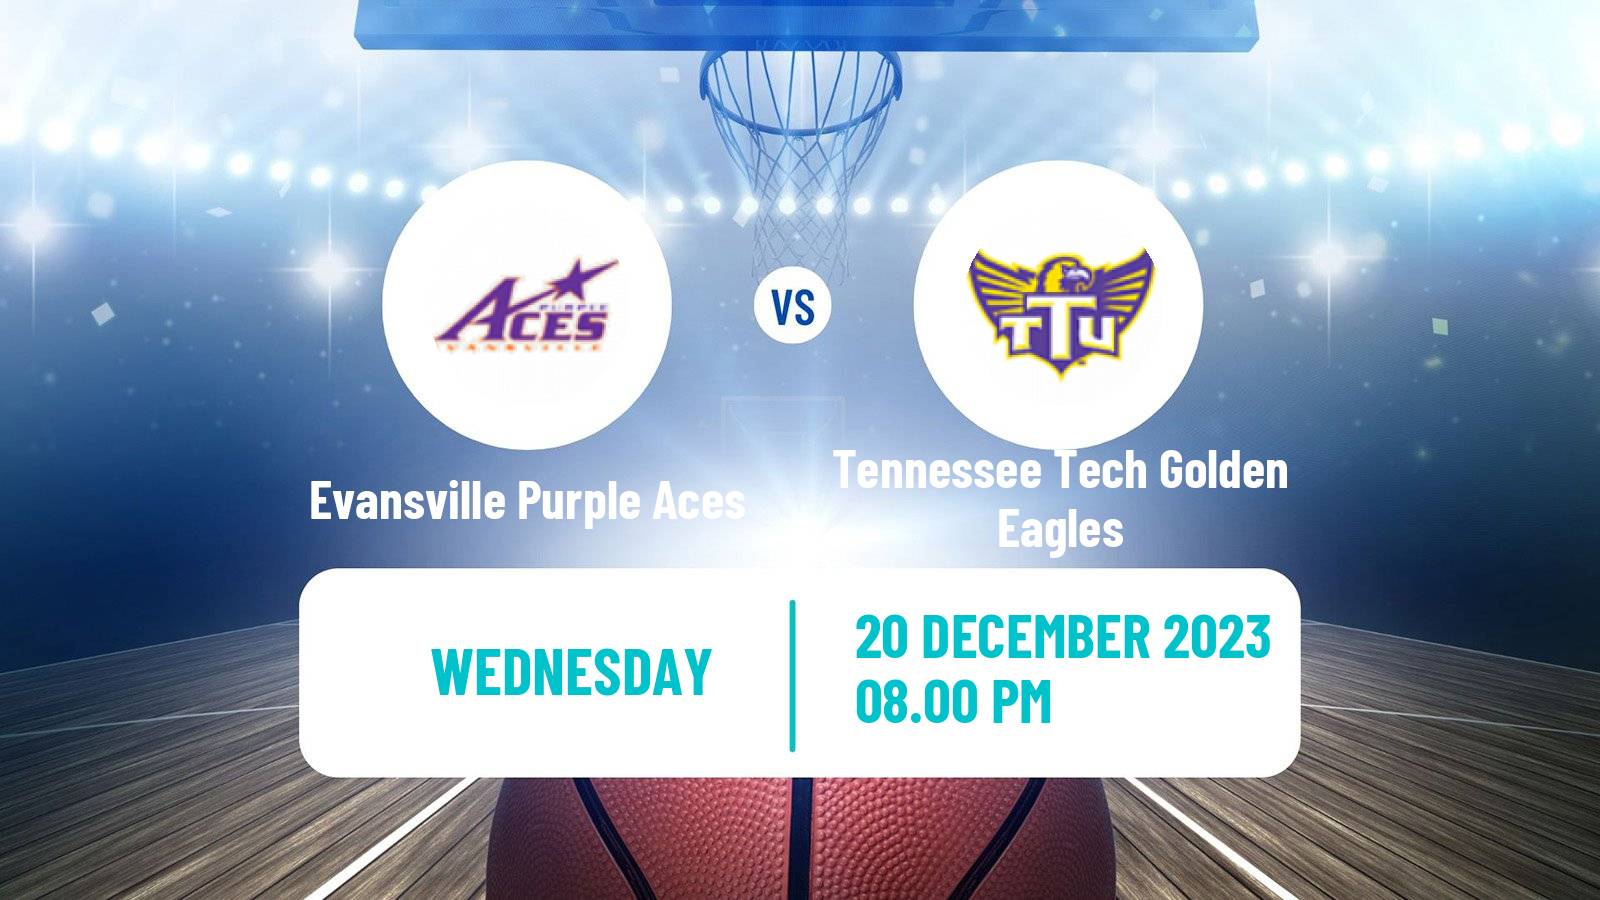 Basketball NCAA College Basketball Evansville Purple Aces - Tennessee Tech Golden Eagles